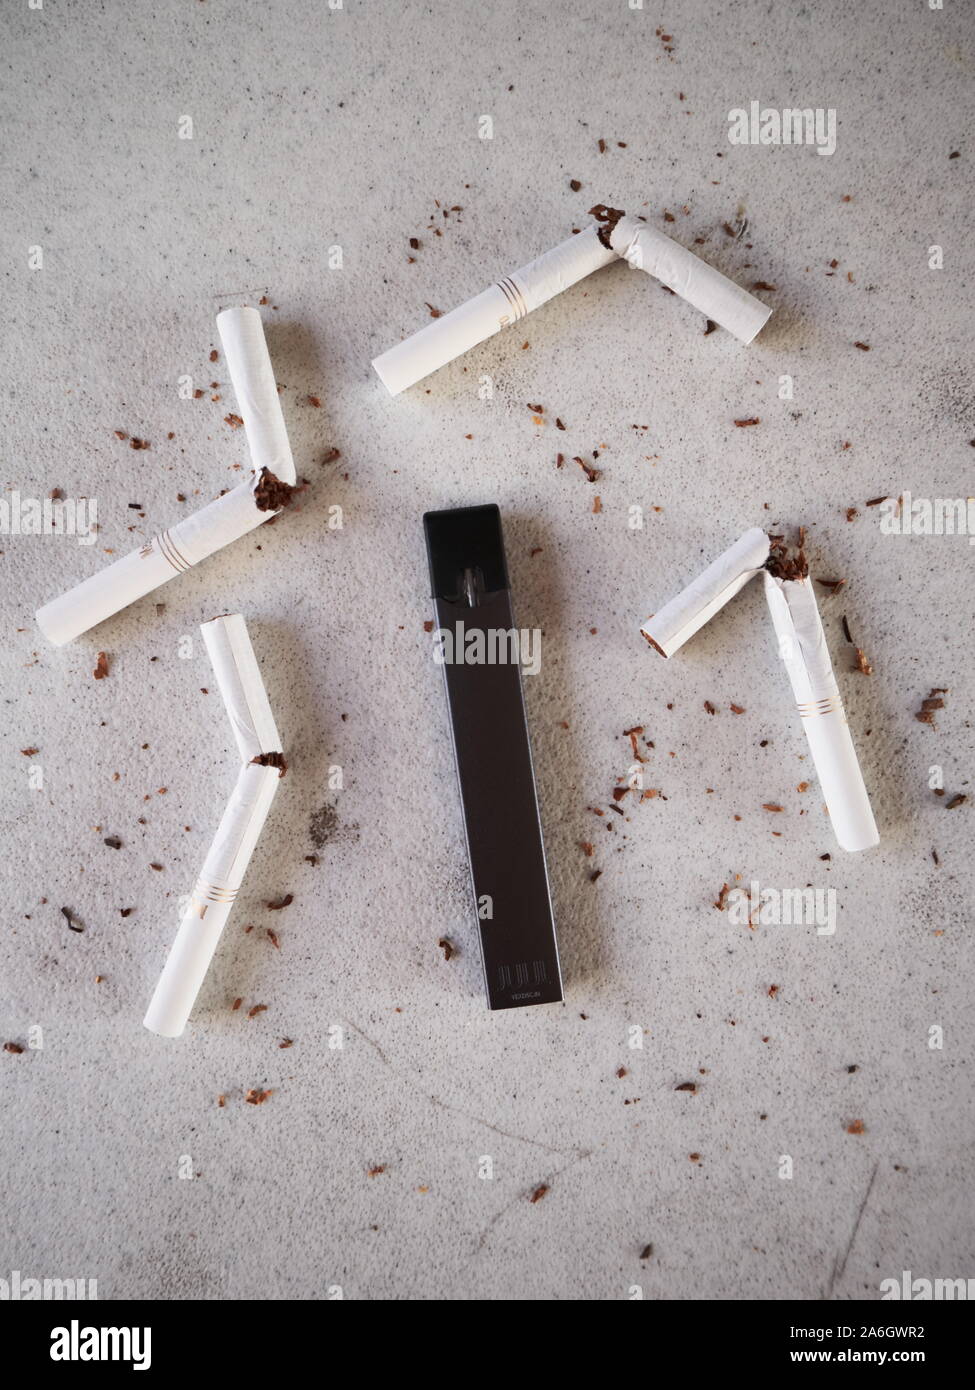 Vape device electronic cigarette juul, as smoking alternative with broken marlboro gold cigarettes and scattered tobacco on white textured background Stock Photo